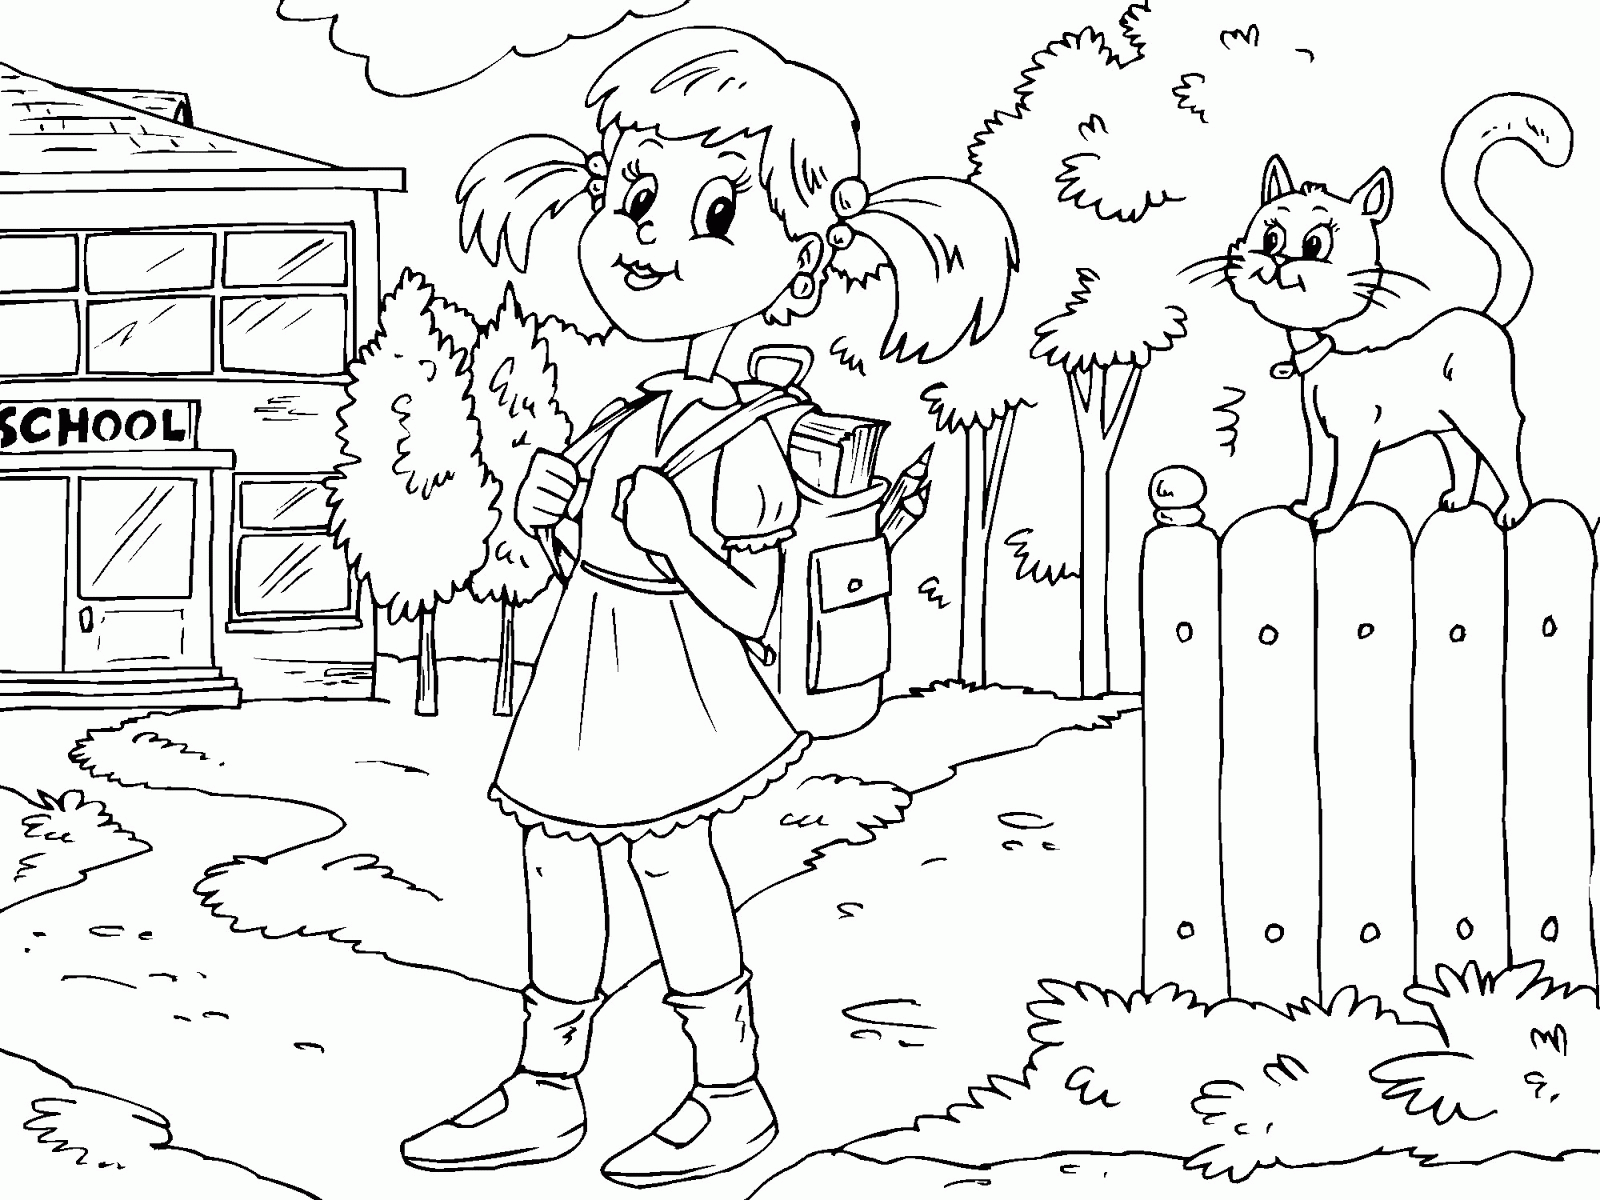 Coloring to go to School ~ Child Coloring